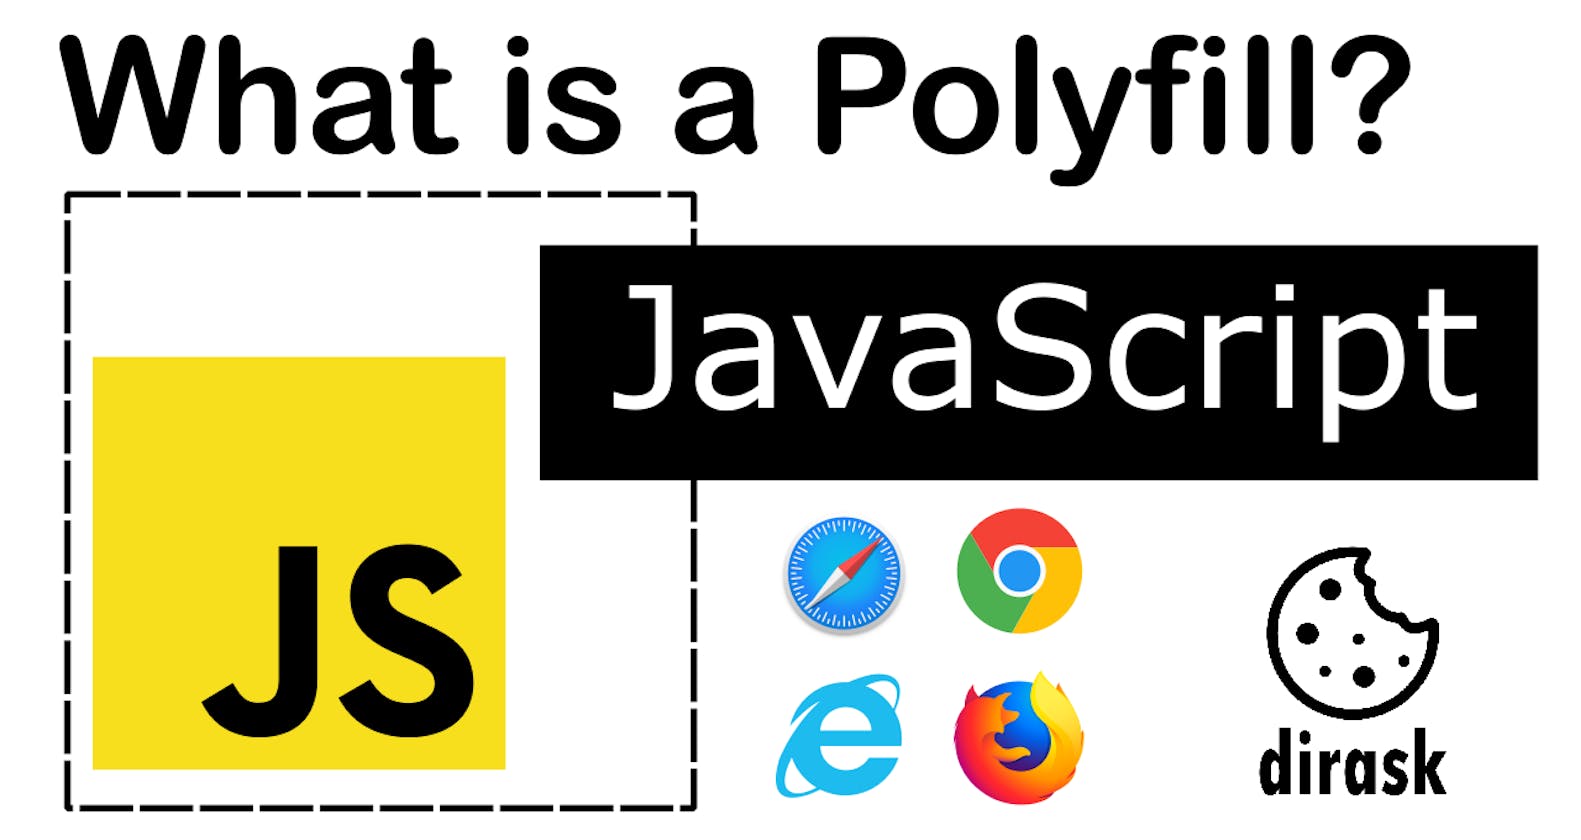 What is a Polyfill in JavaScript?